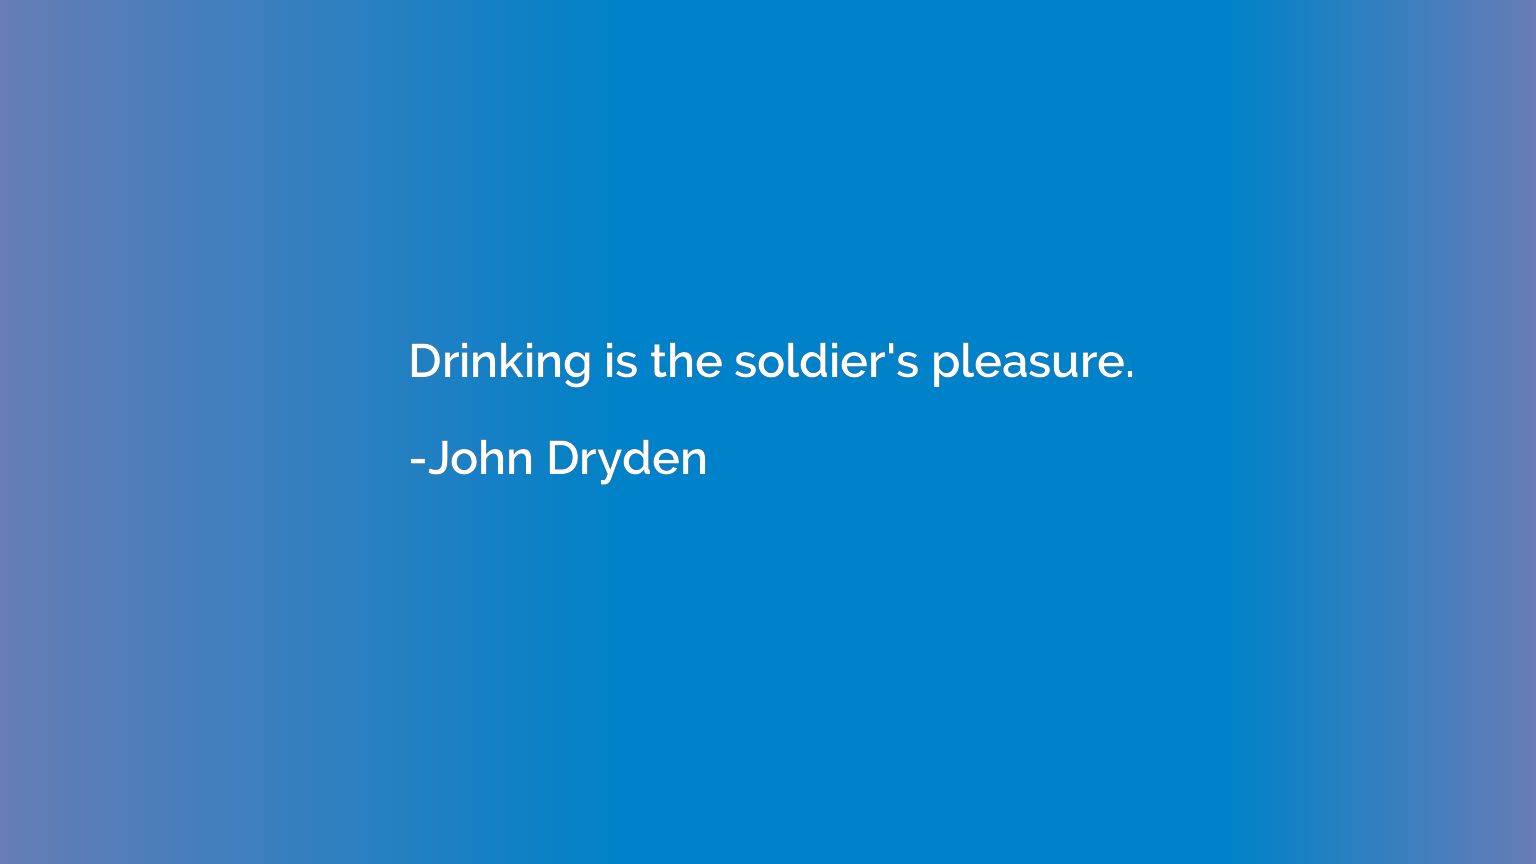 Drinking is the soldier's pleasure.